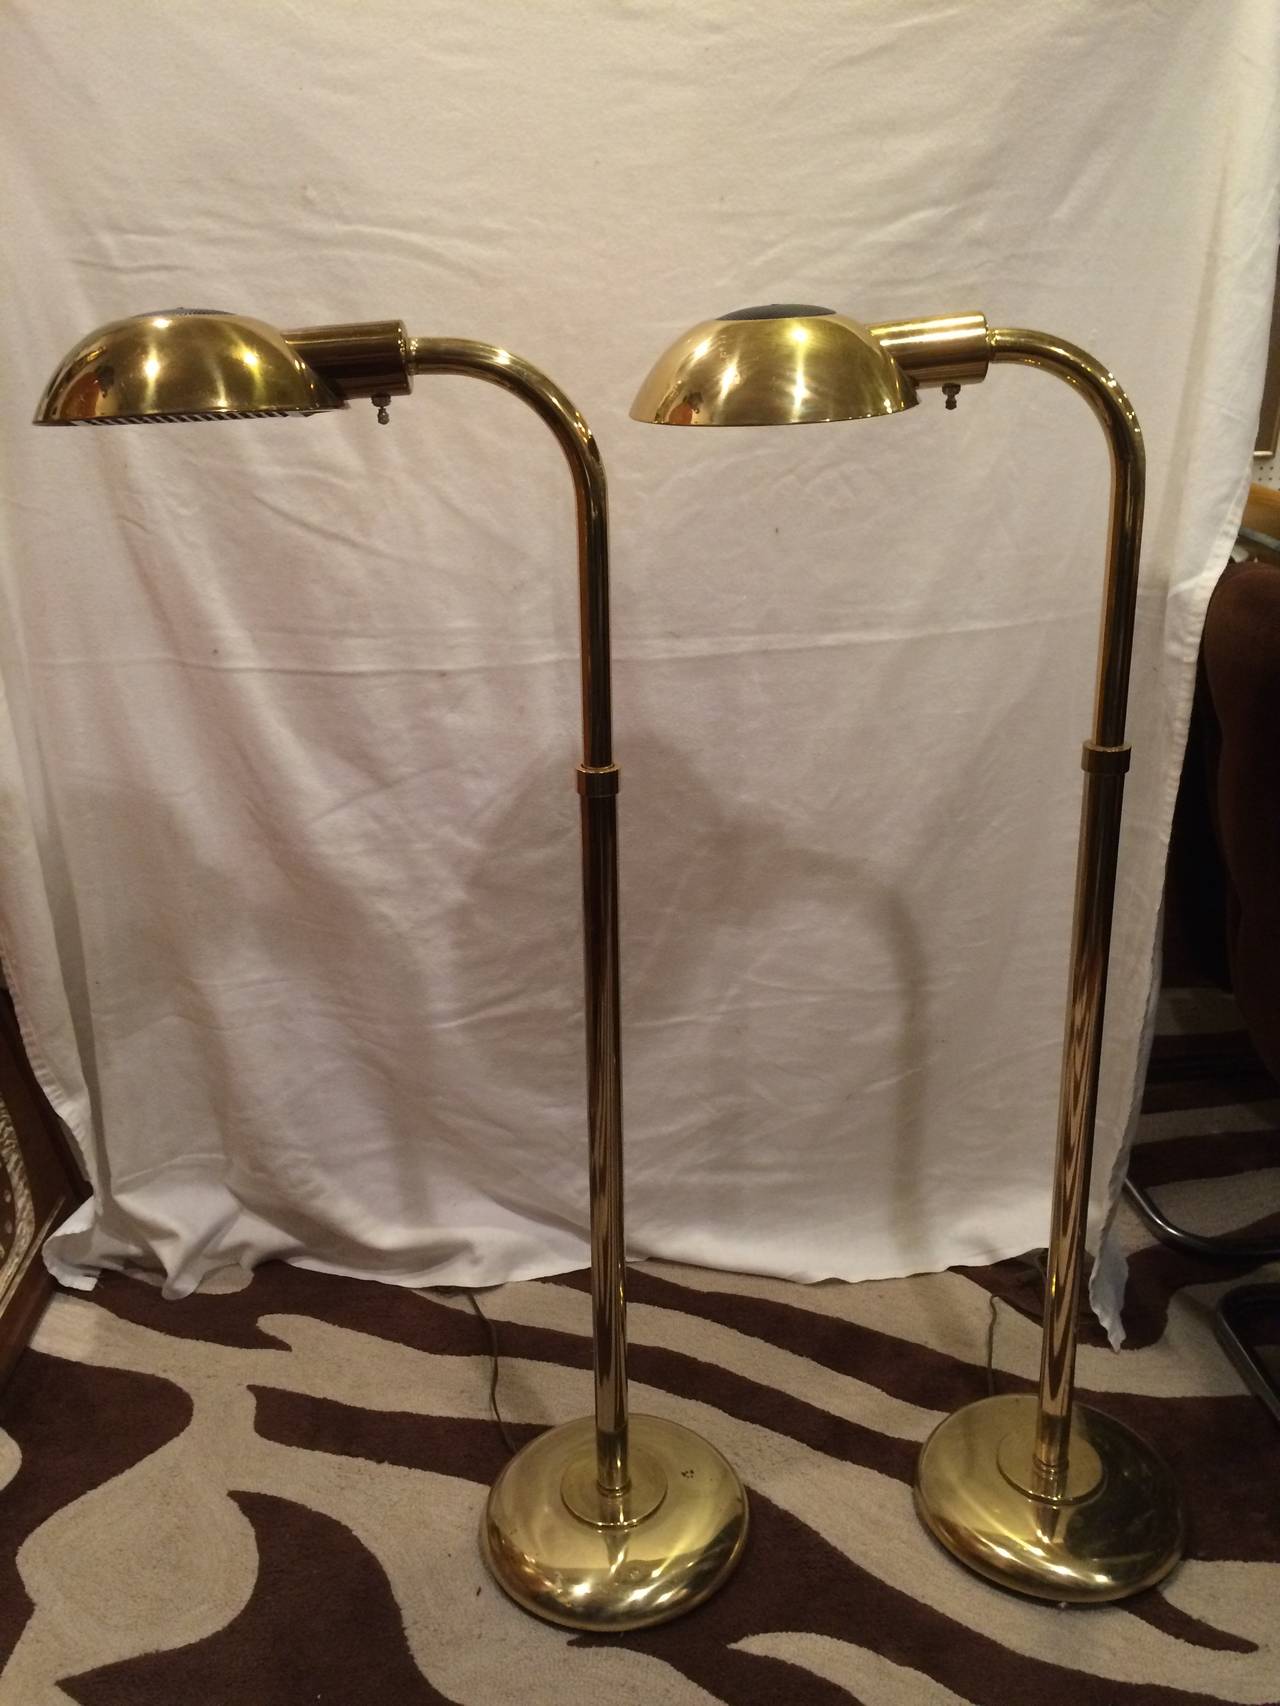 Pair of Mid-Century Modern brass floor lamps.Swiveling adjustable head and neck. Not adjustable in height.